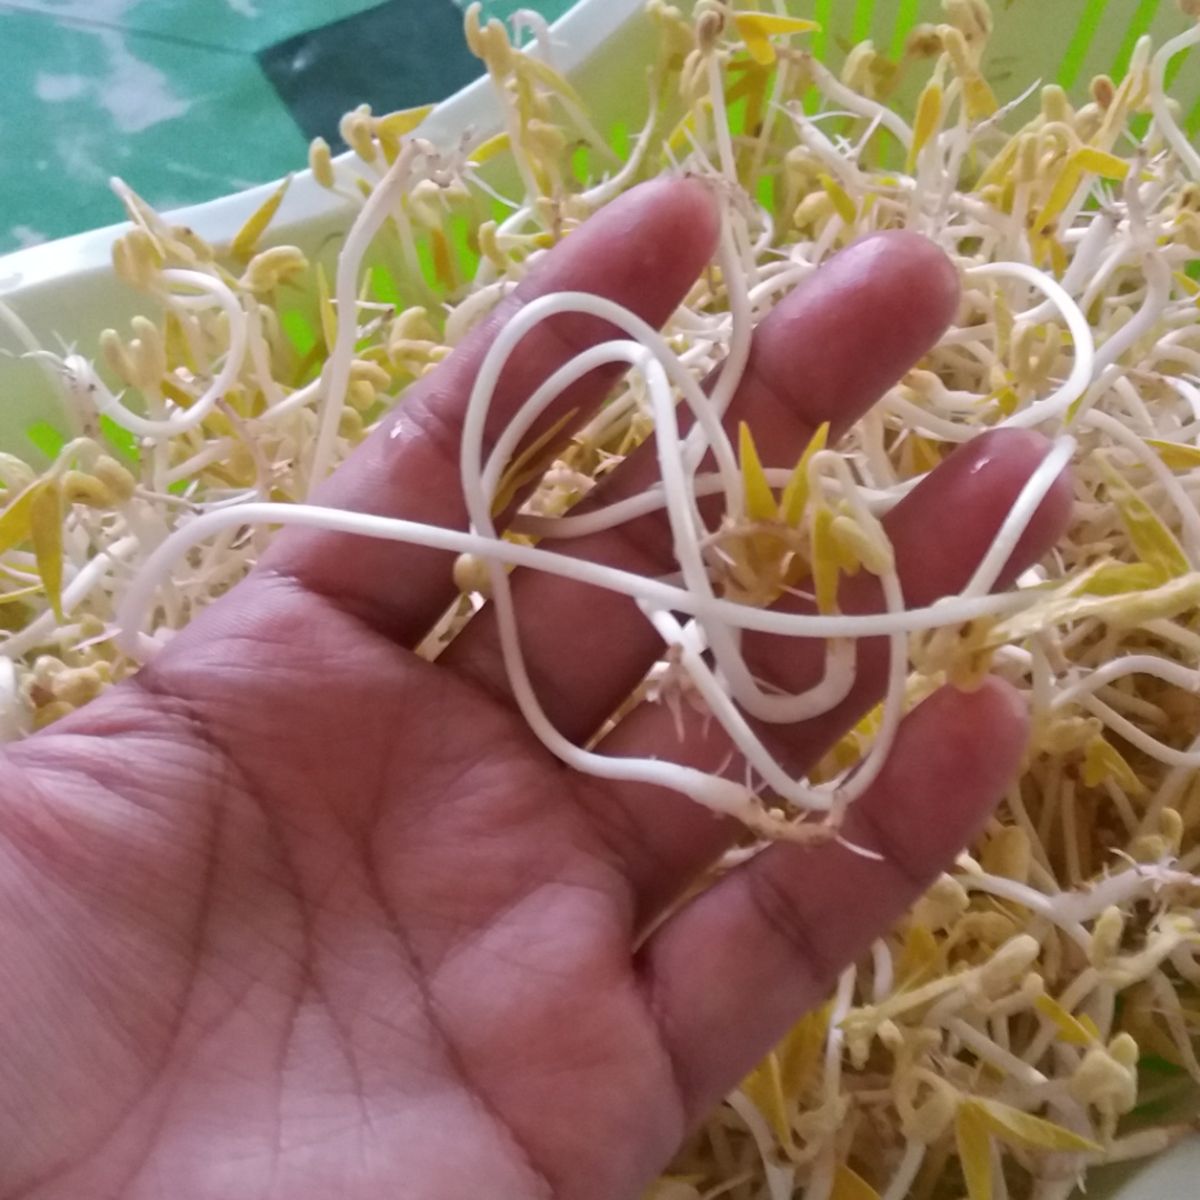 Mung bean sprouts growing.